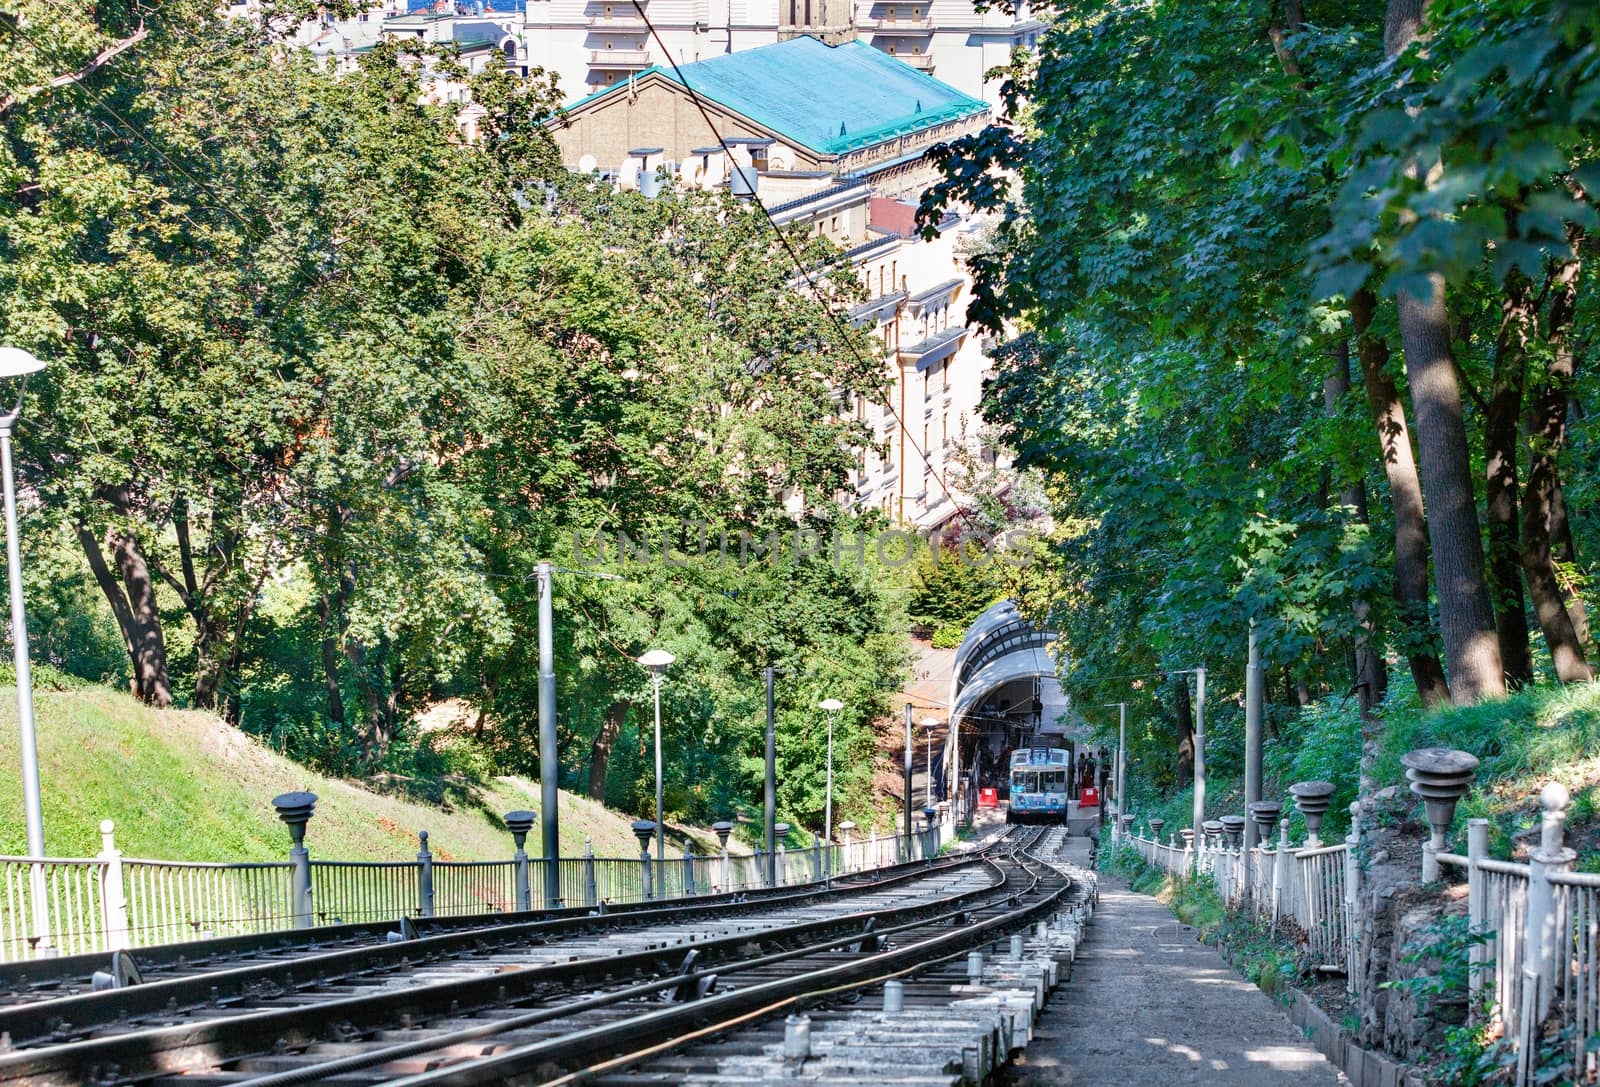 The cable funicular picks up passengers at the lower station, surrounded by a summer green park among the city buildings. by Sergii